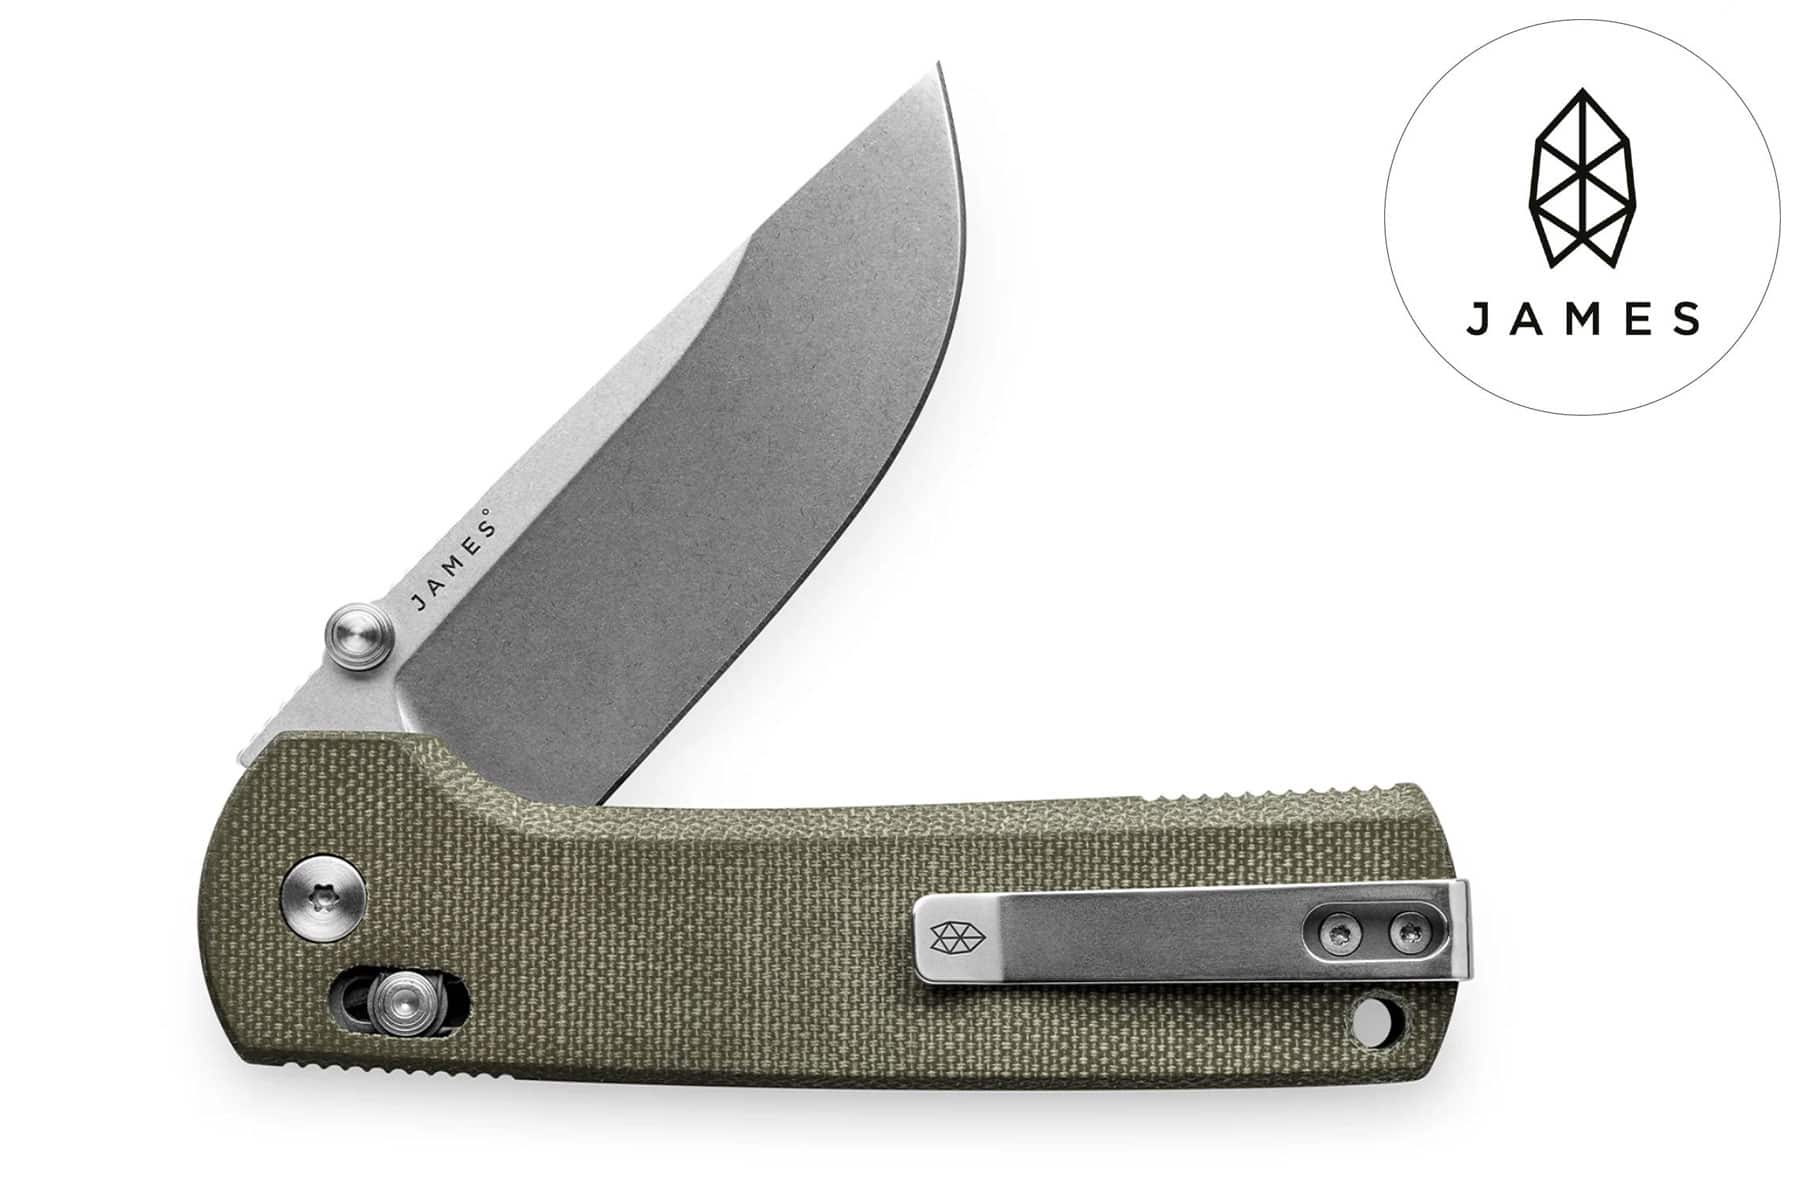 The Barnes is one of the firs James Brand knives made in the USA.